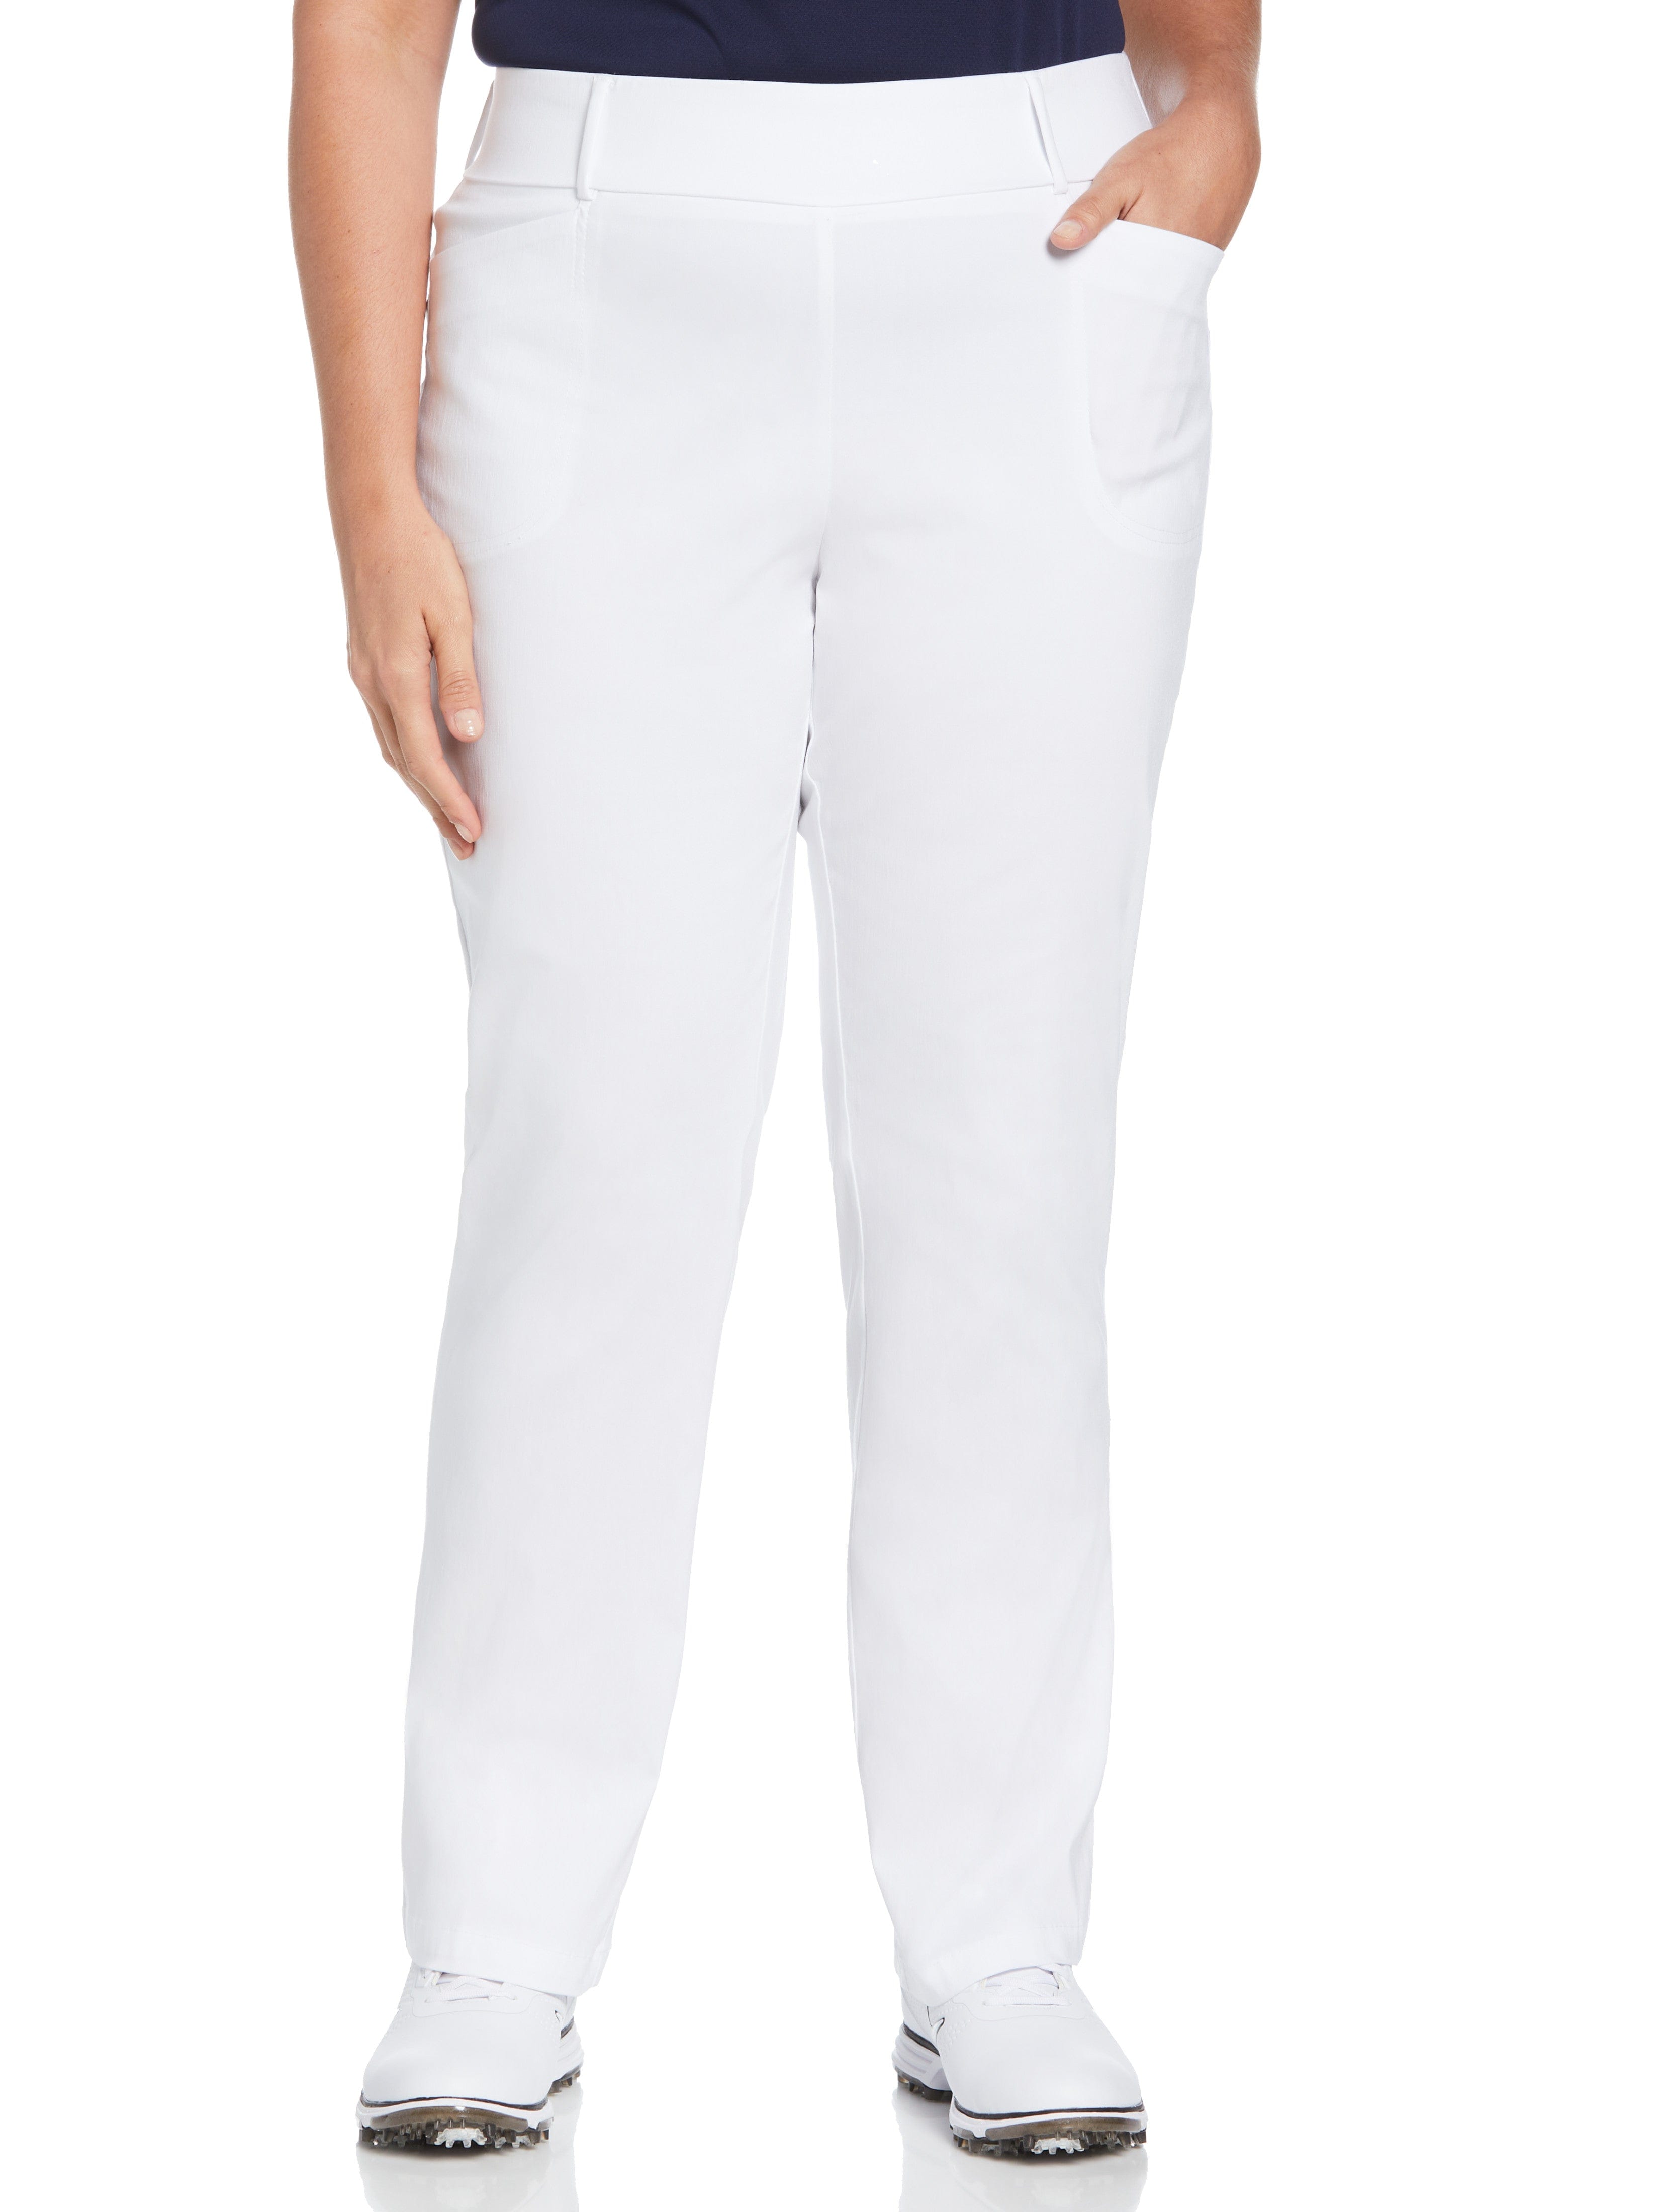 Womens White Trousers | House of Fraser